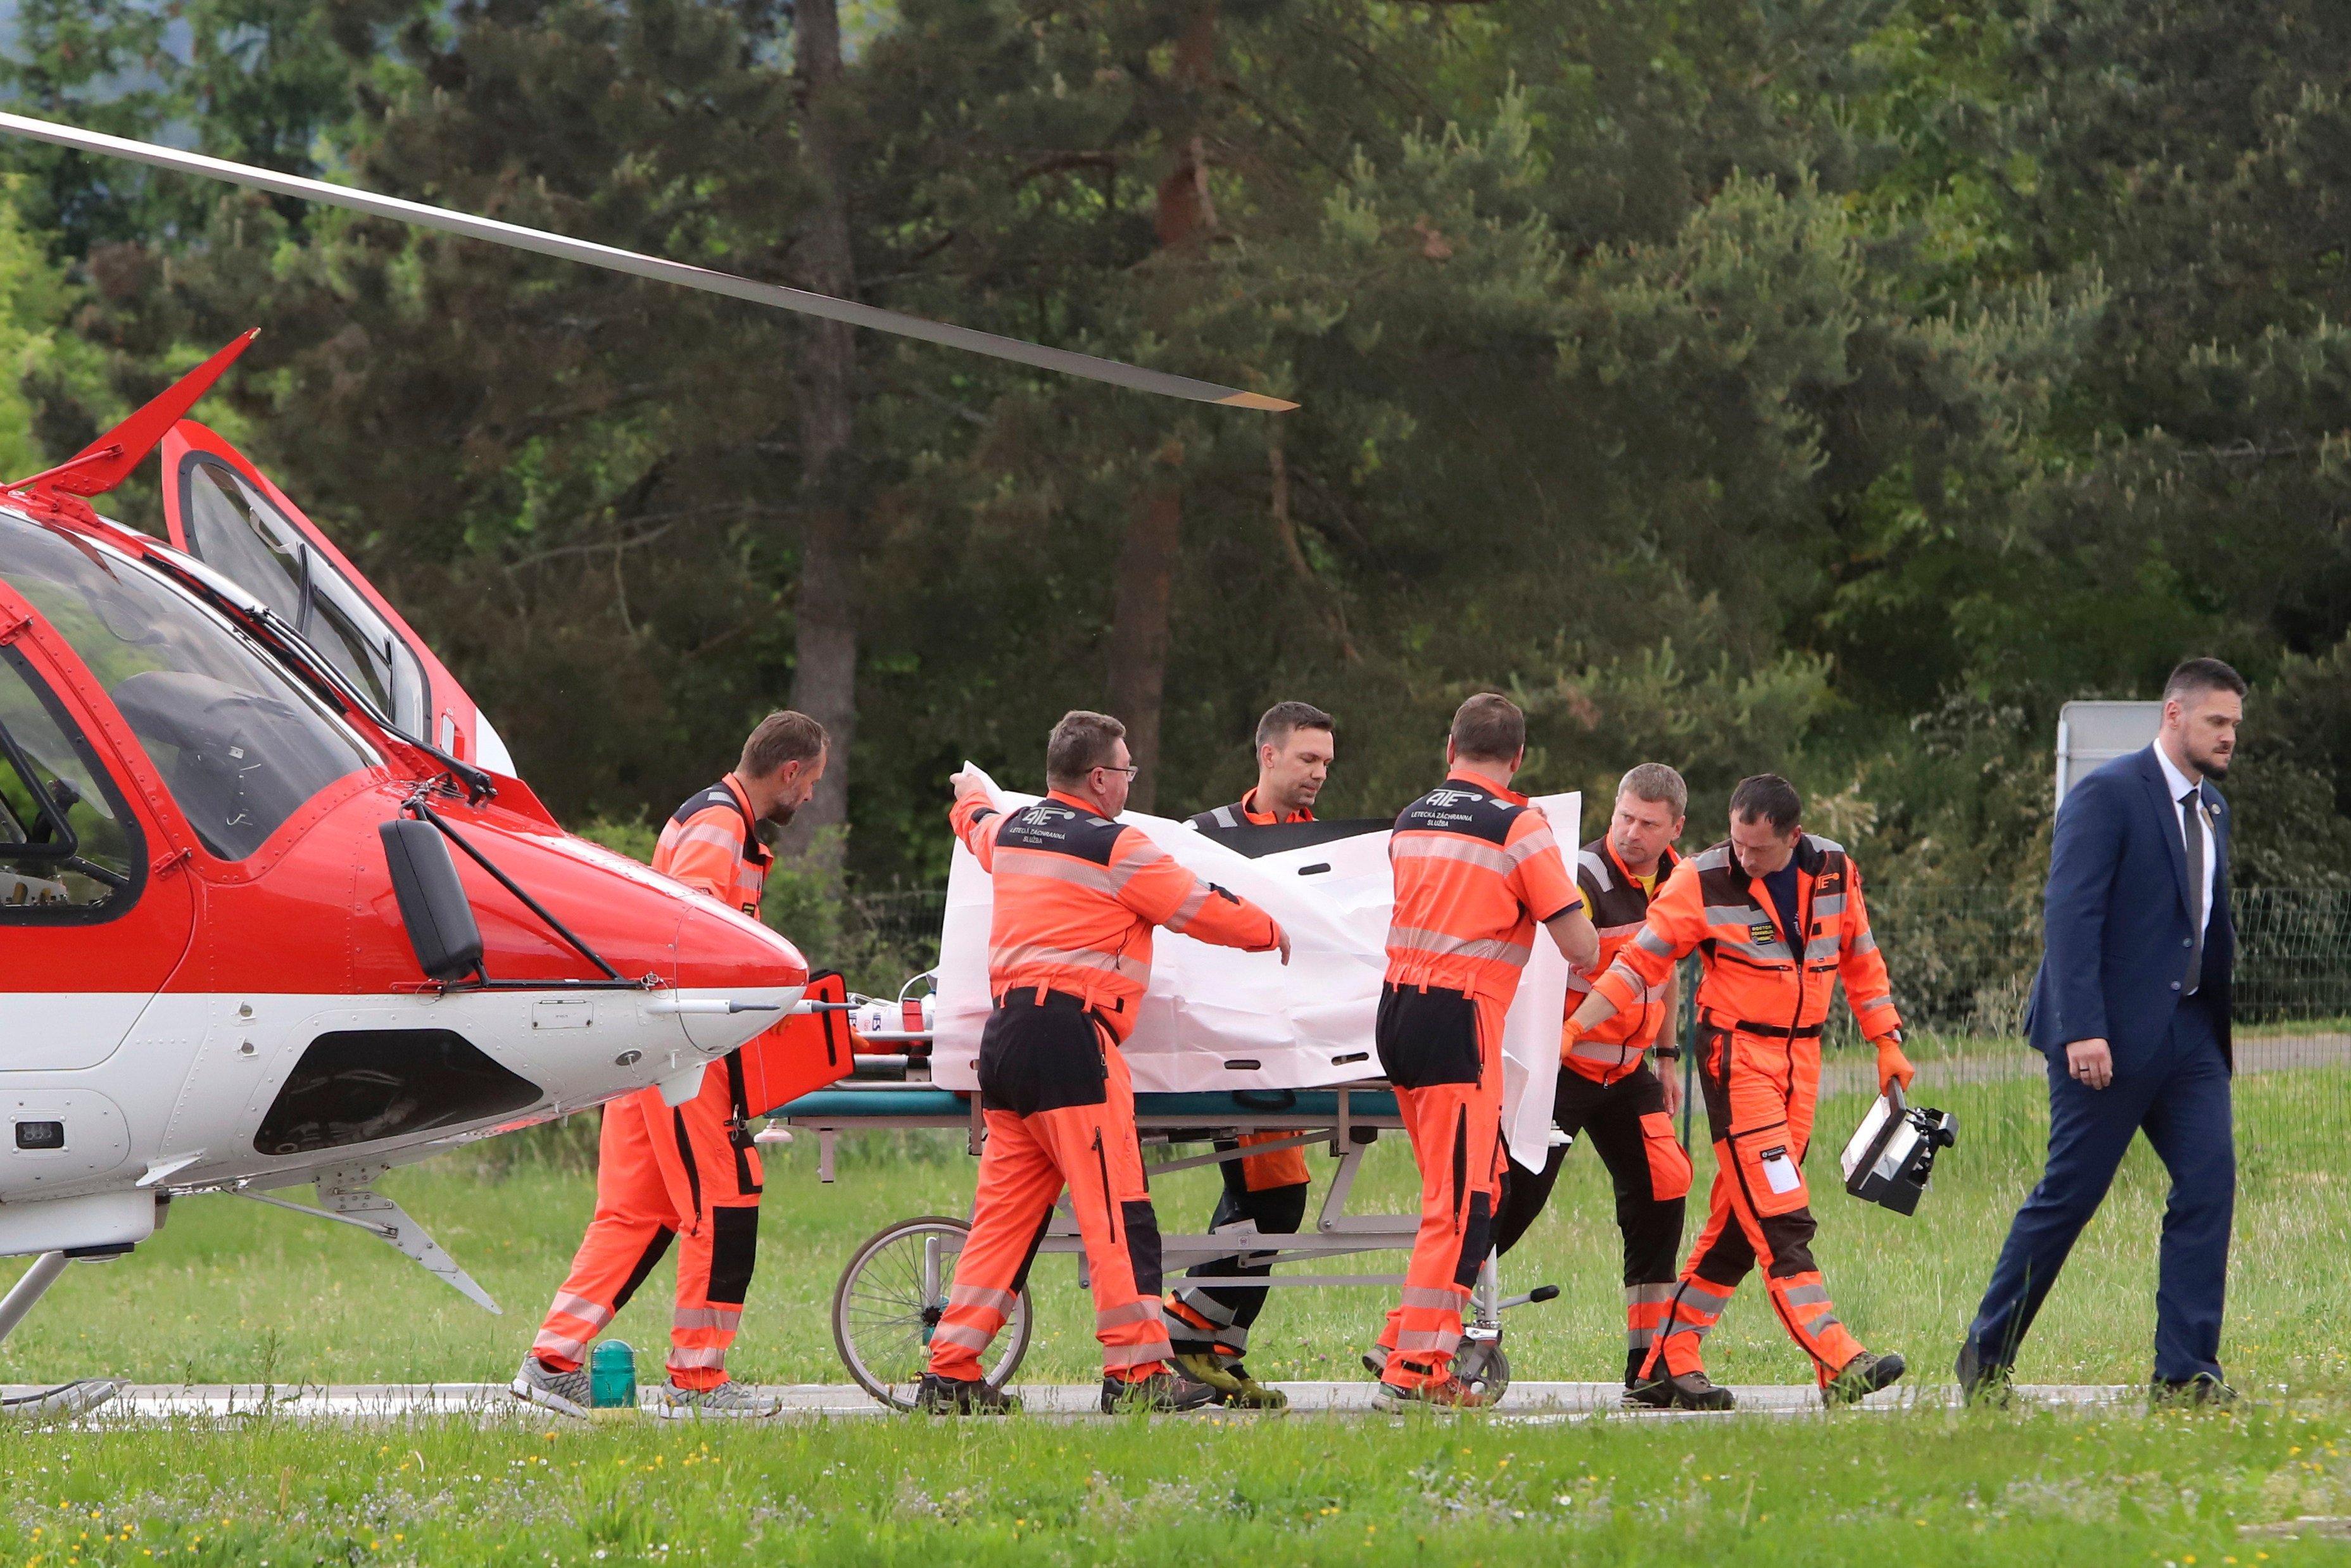 Rescue workers wheel Slovak Prime Minister Robert Fico, who was shot and injured, to a hospital on Wednesday. Photo: AP